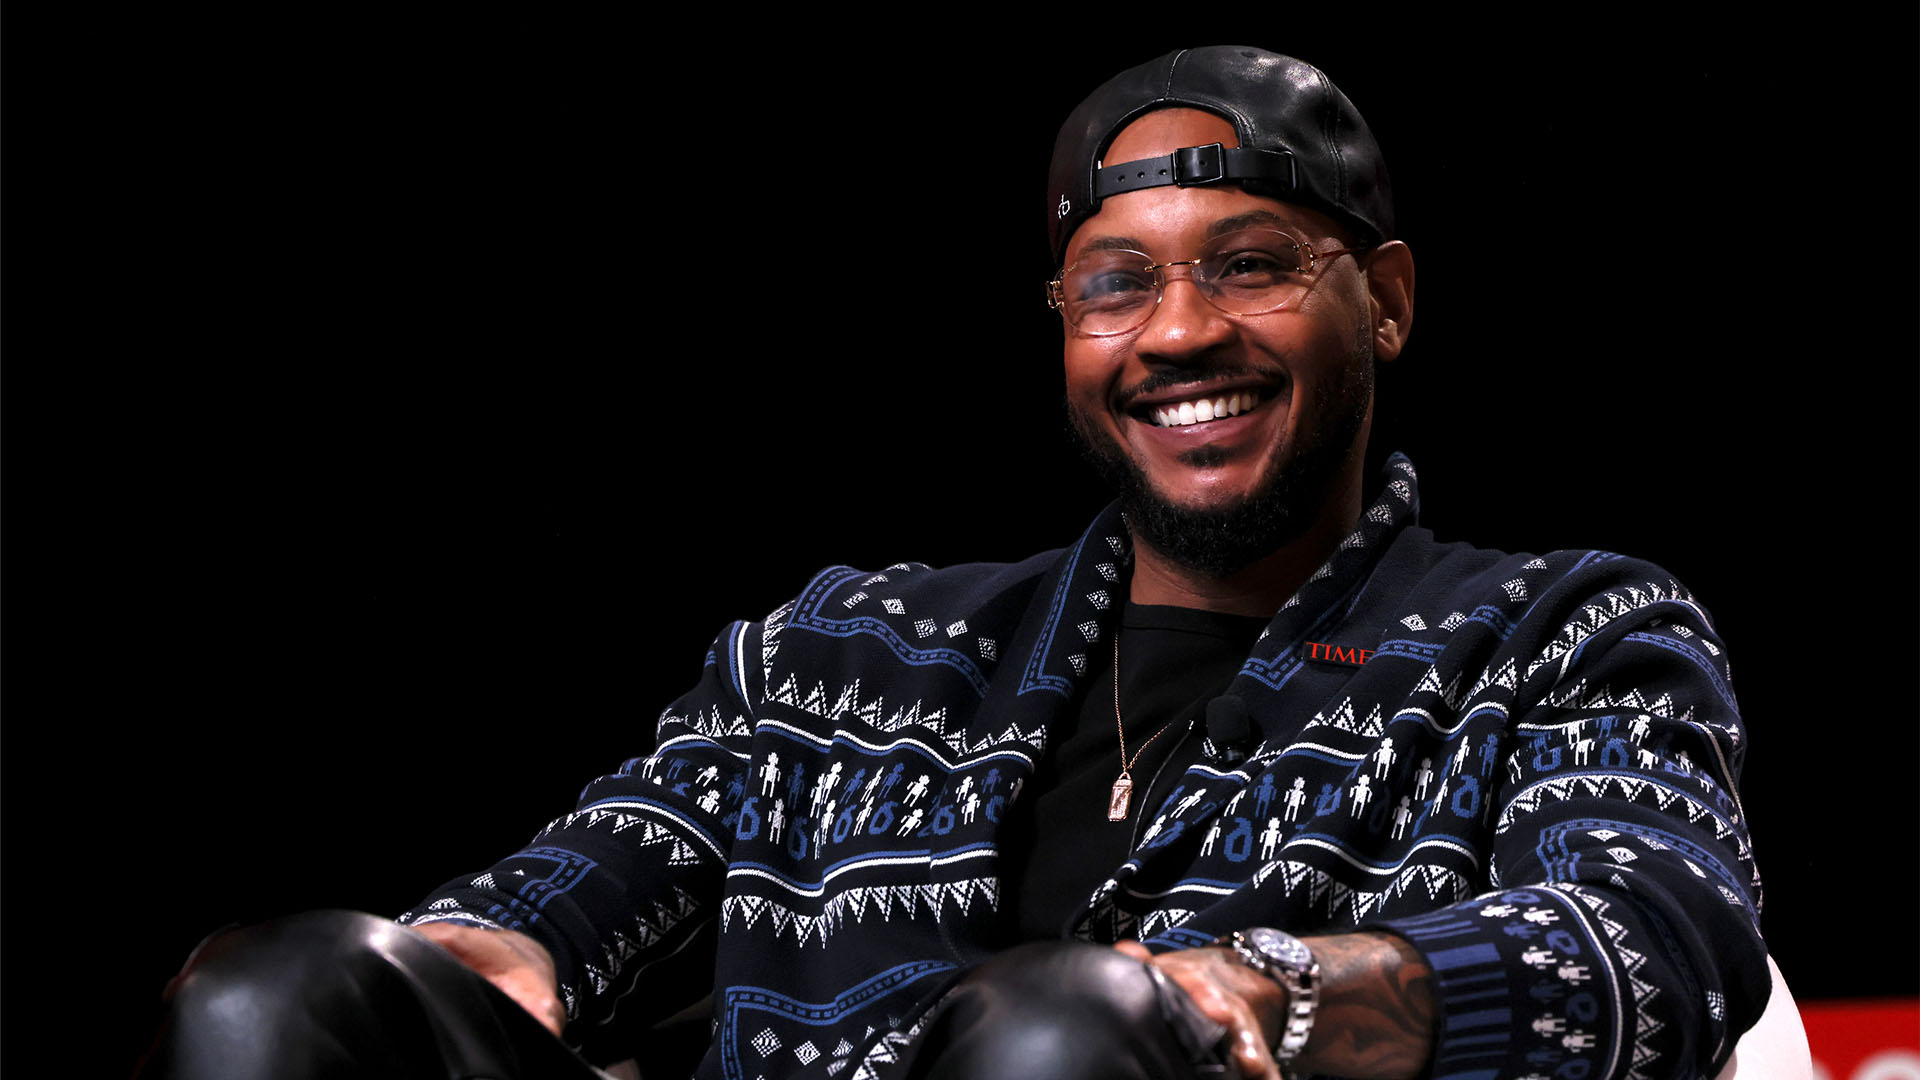 How Carmelo Anthony Became The Jordan Brand's First Signature Athlete With His Own Shoe, Earning A Reported 6-Year Deal Worth $3.5M Annually